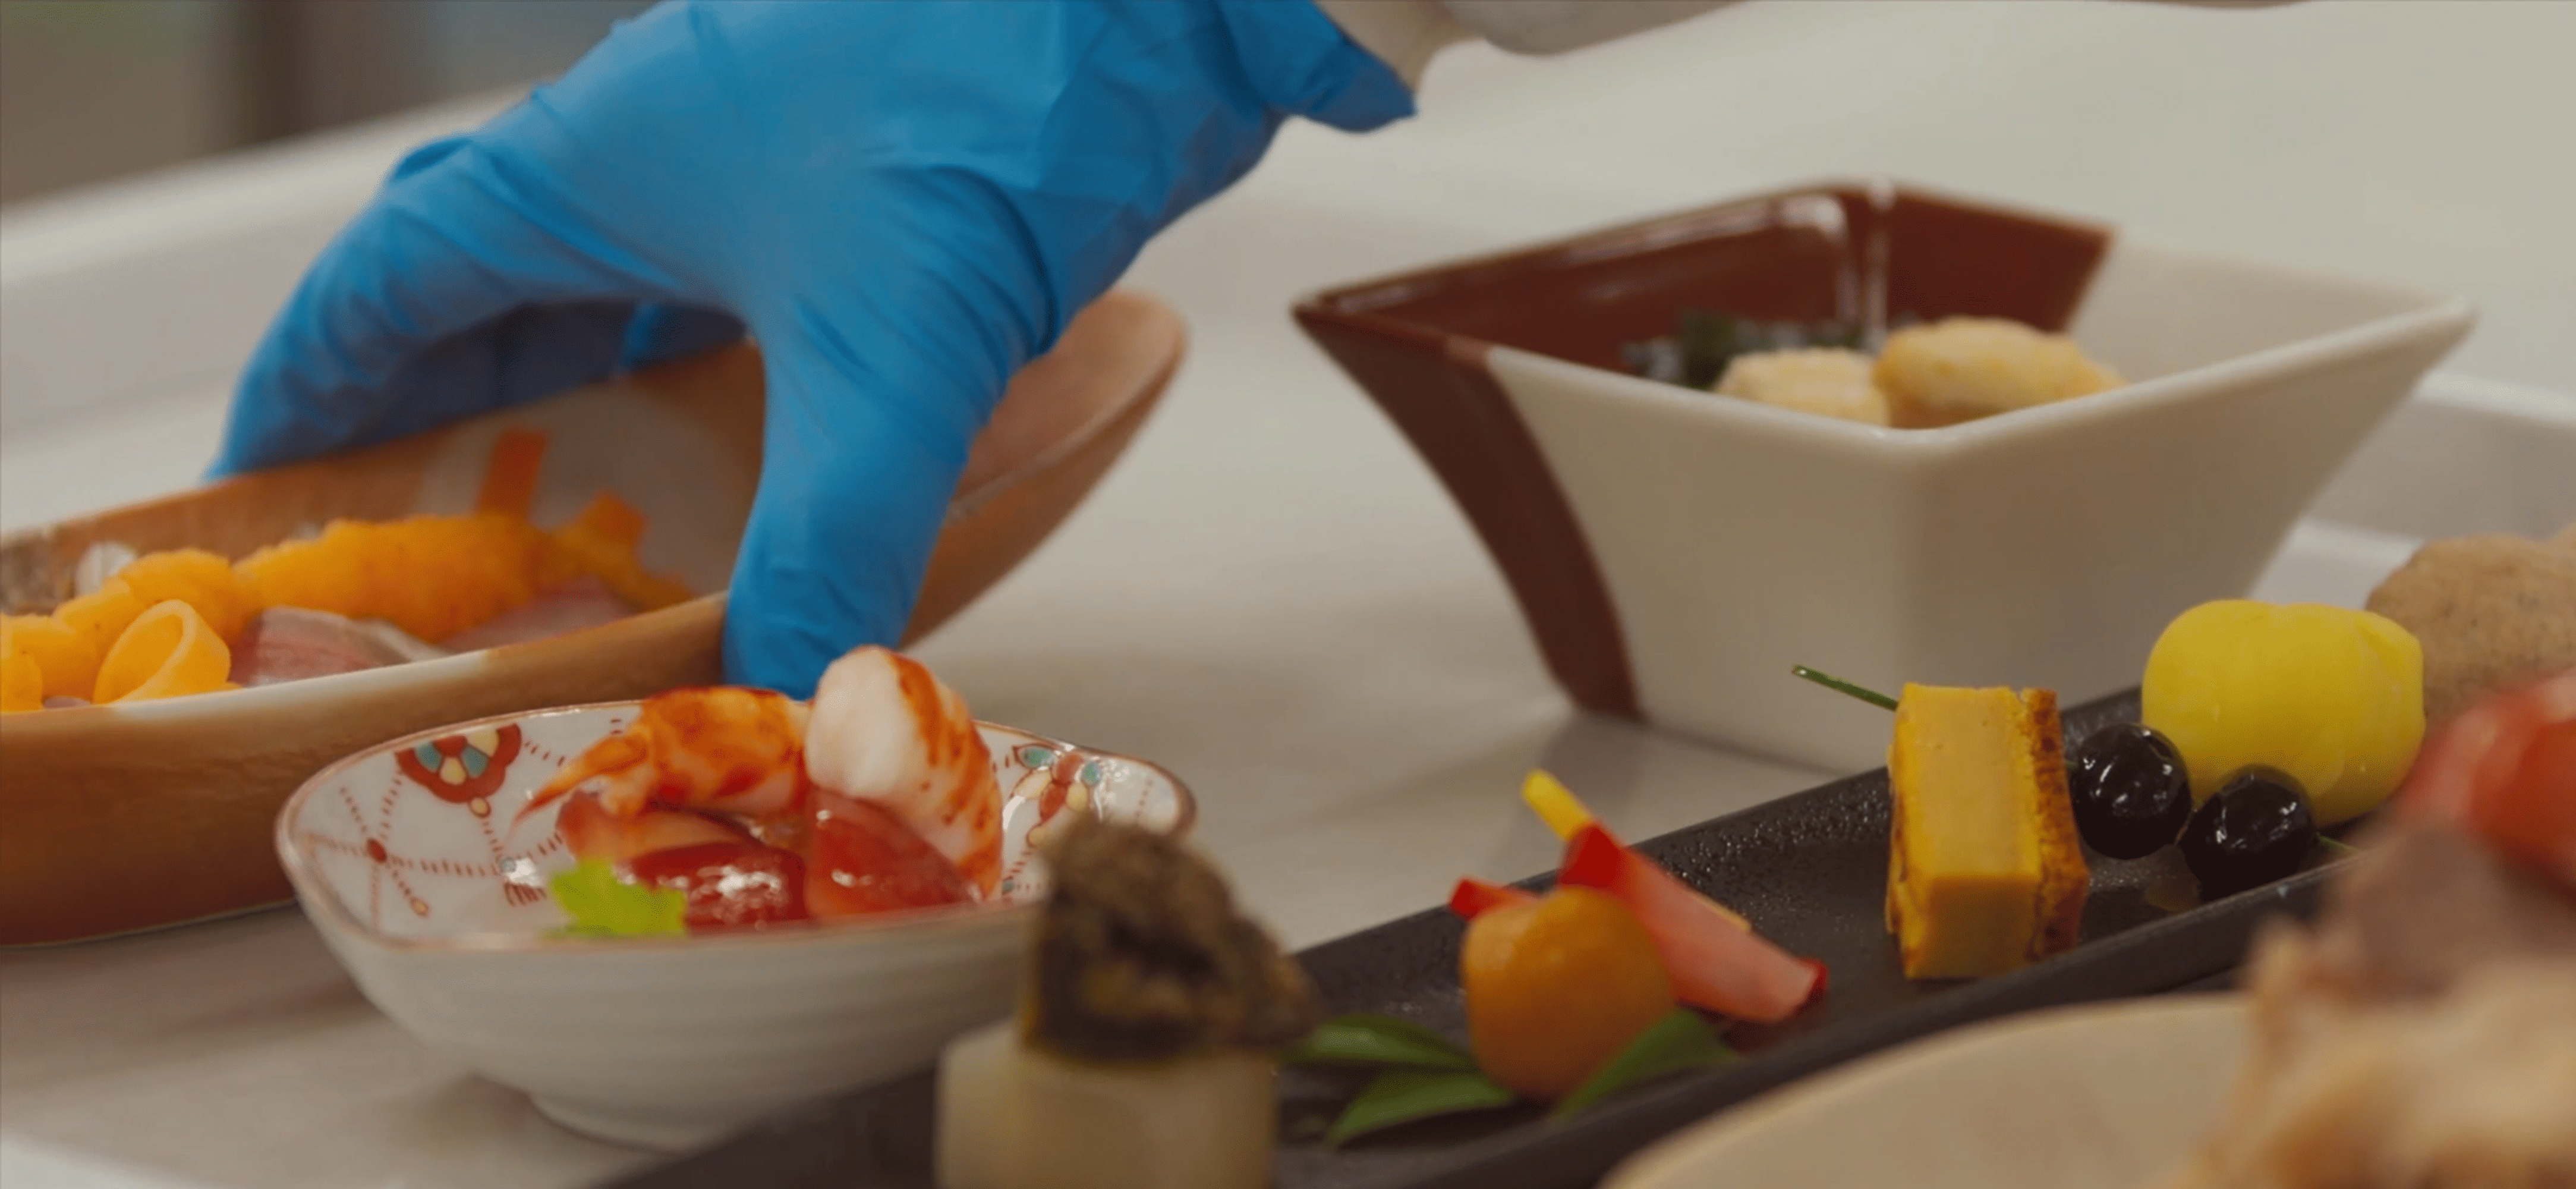 Watch: A Day in the Life of an ANA Chef